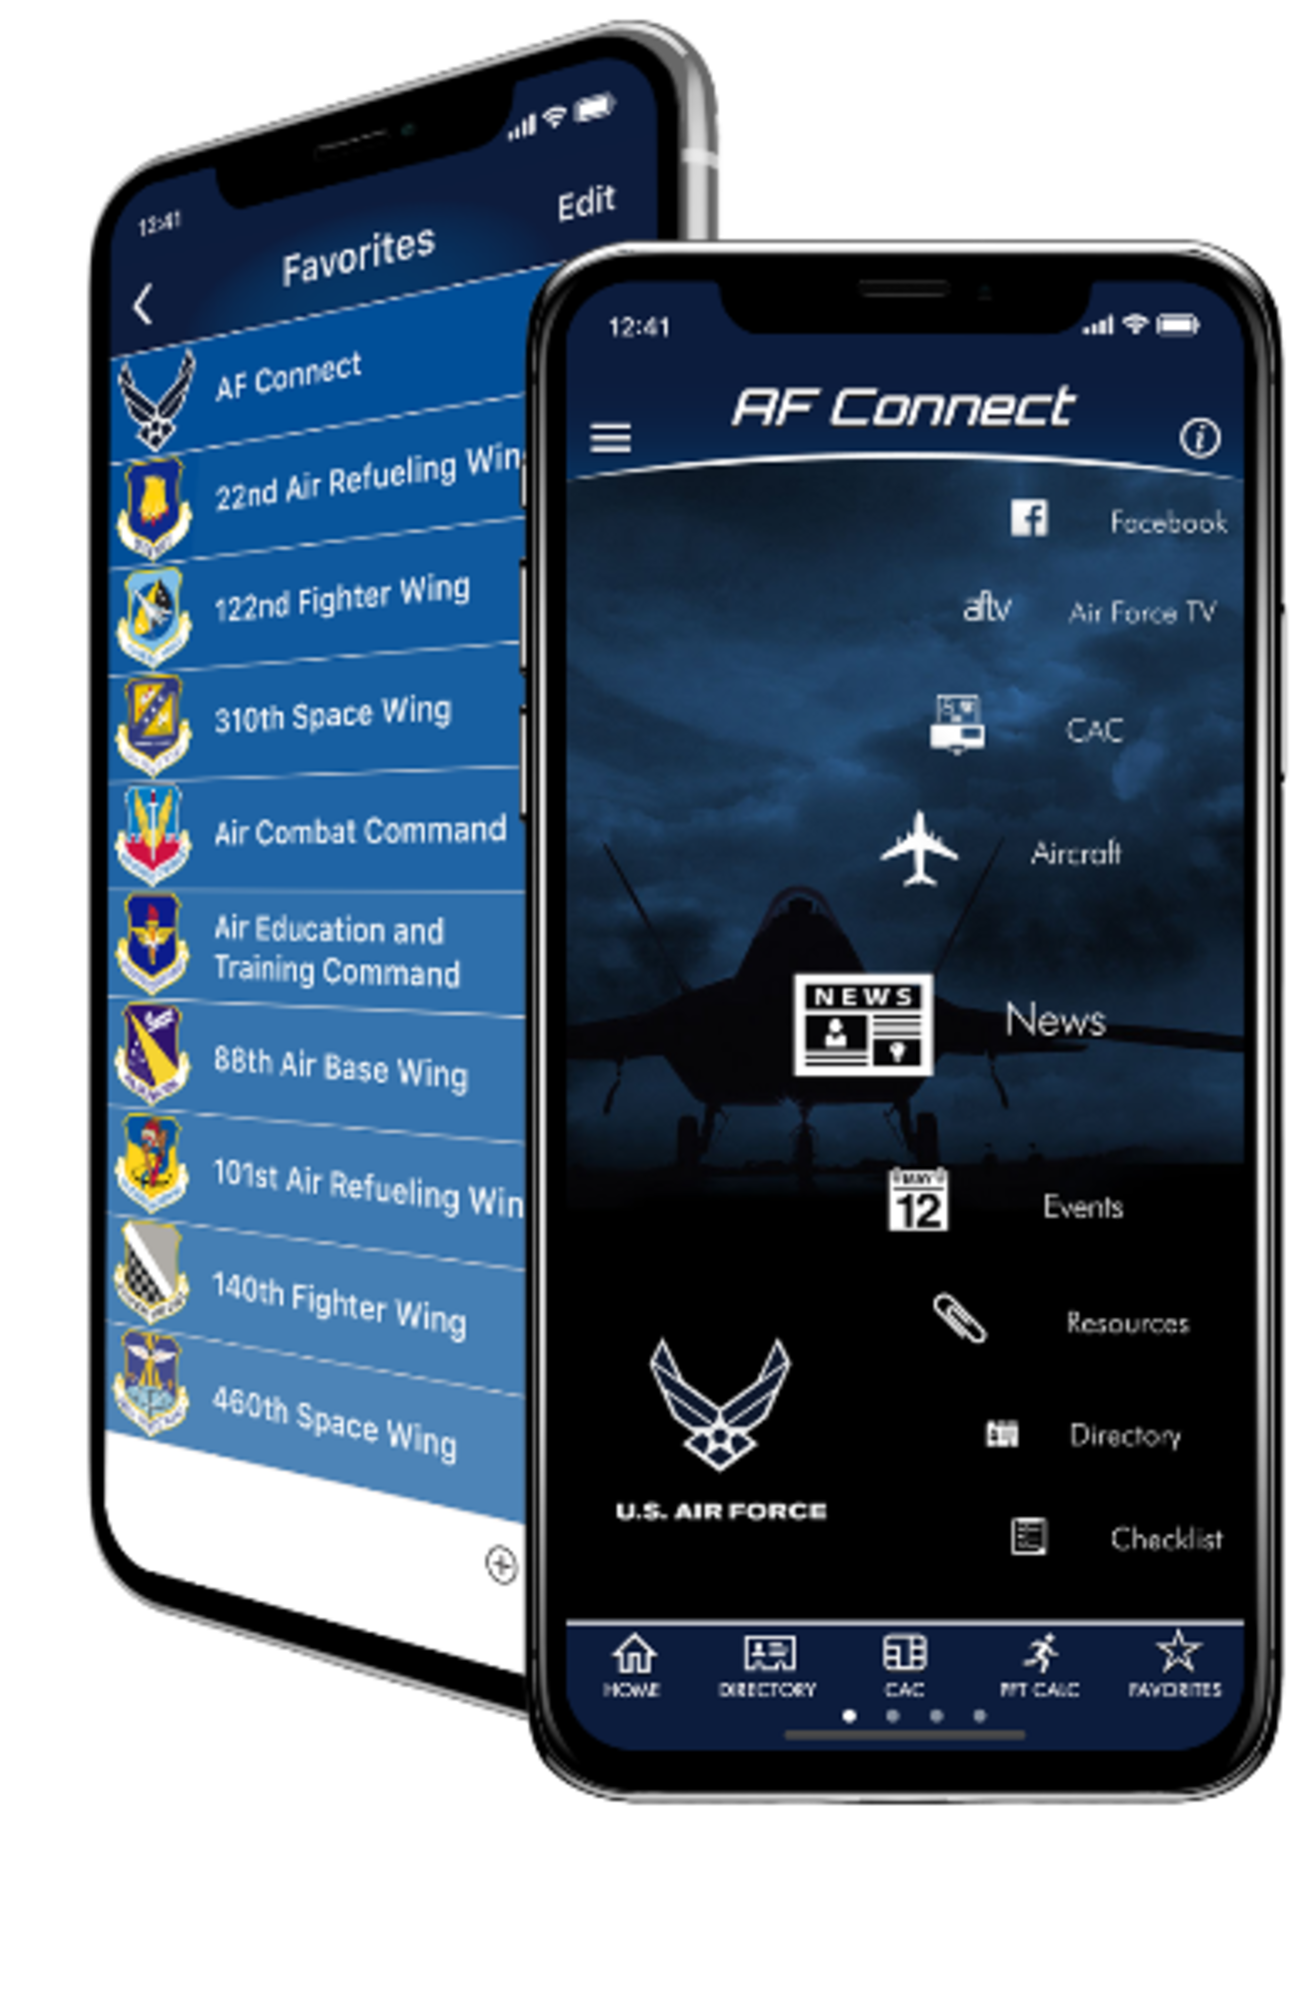 The 166th Airlift Wing is excited to announce the launch of the 166th Airlift Wing mobile application in USAF Connect. This app augments traditional command communication tools by consolidating multiple resources in a single location, easing access to information and news from all channels. (Courtesy photo)